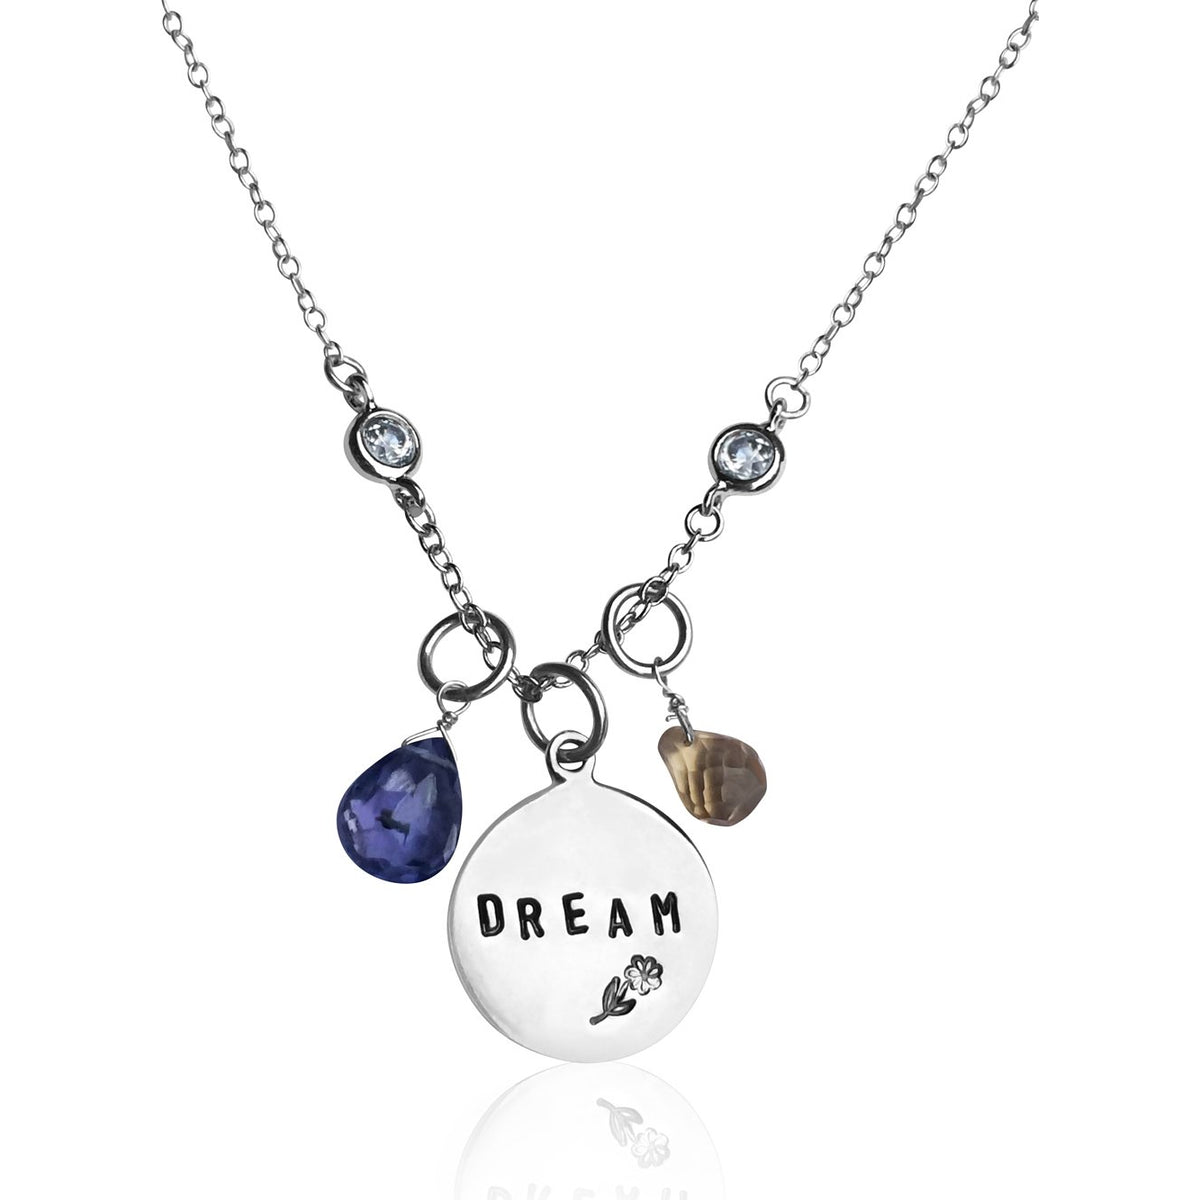 DREAM Inspirational Sterling Silver Necklace with Tanzanite and Citrine